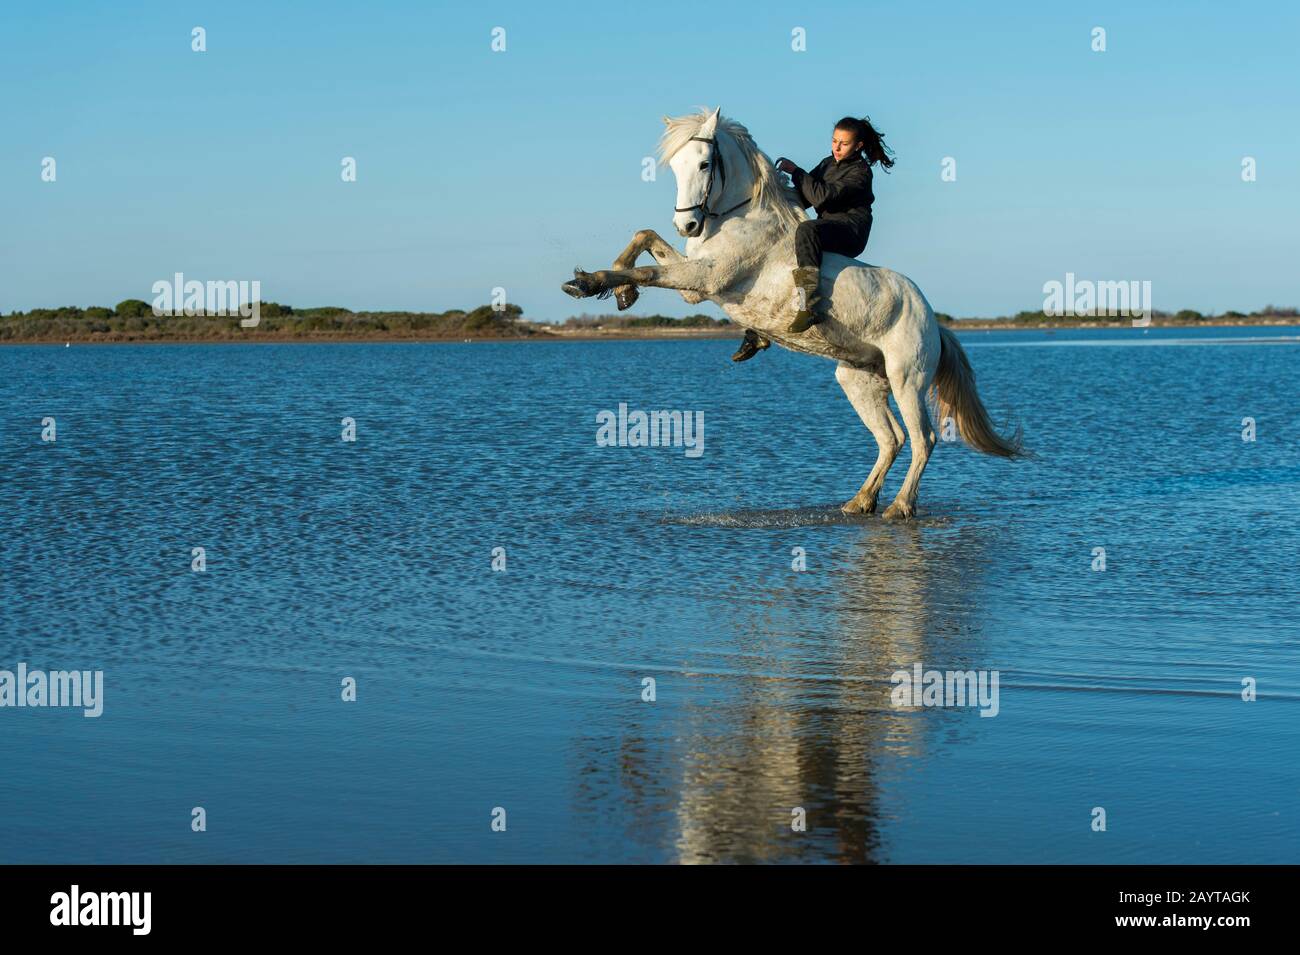 A Guardian (Camargue cowgirl) with her horse rearing up in the marshlands of the Camargue in southern France. Stock Photo